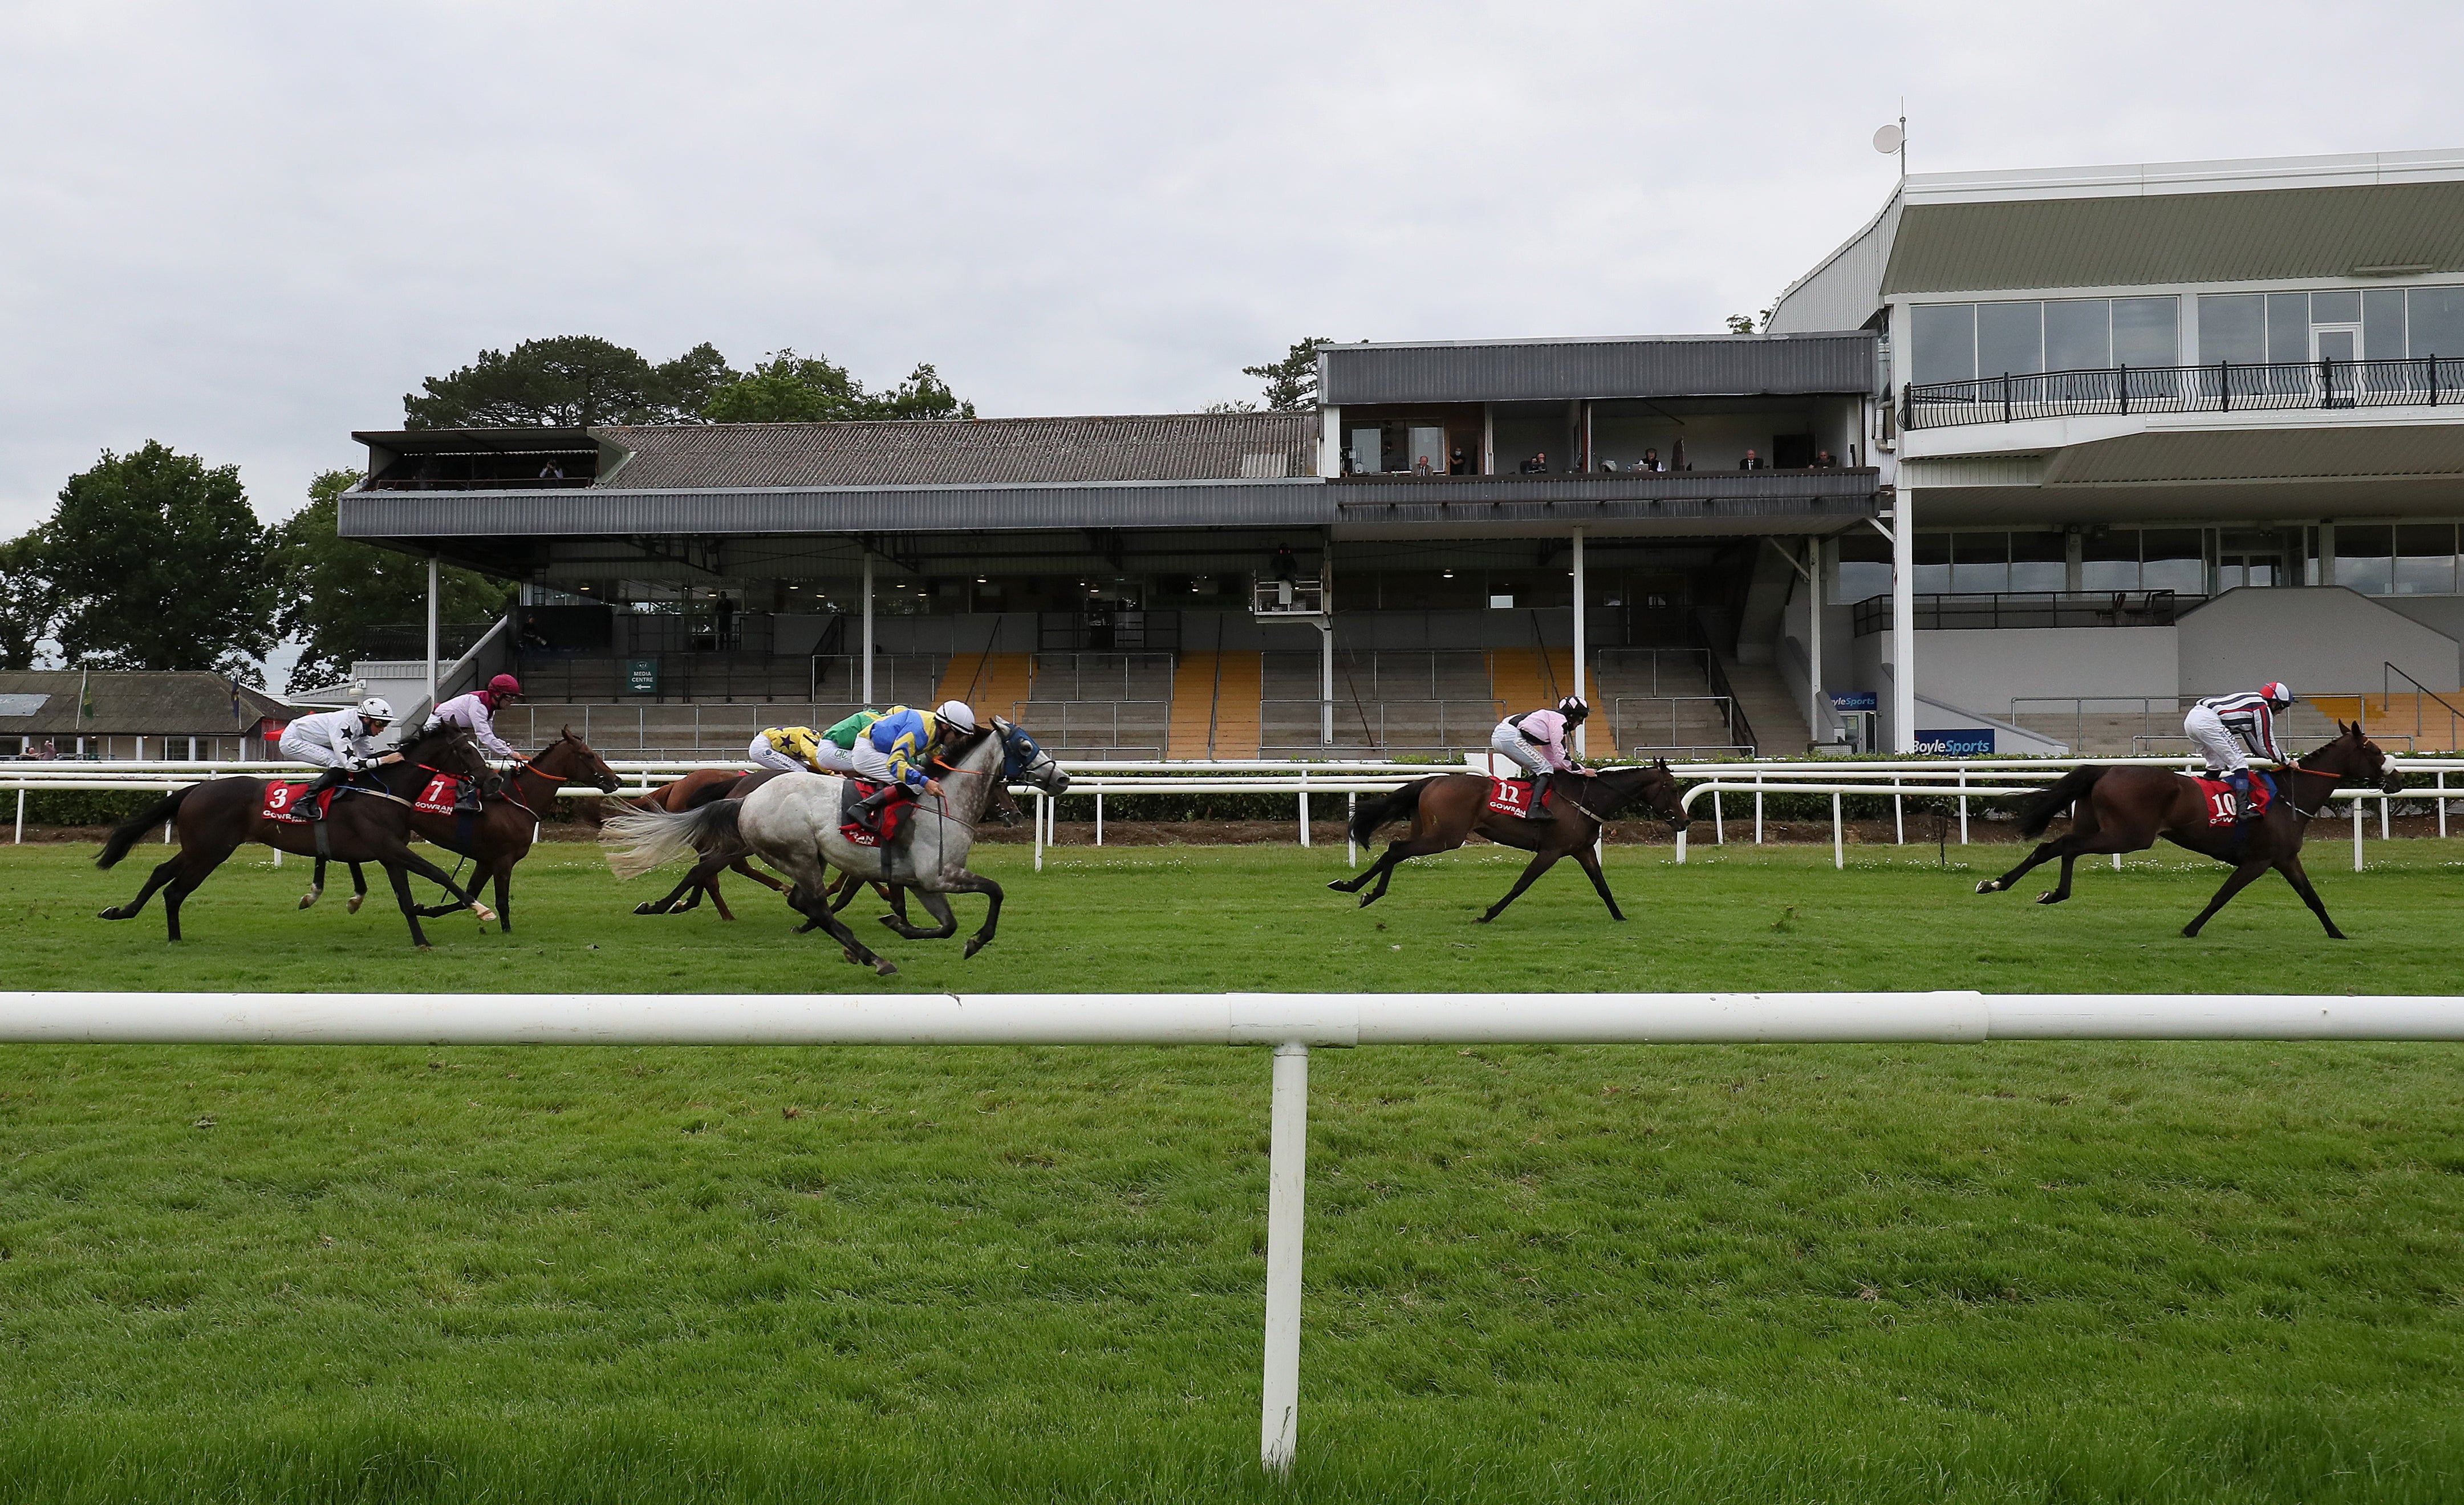 Gowran Park is one of two racecourses in Ireland to welcome back owners on Monday